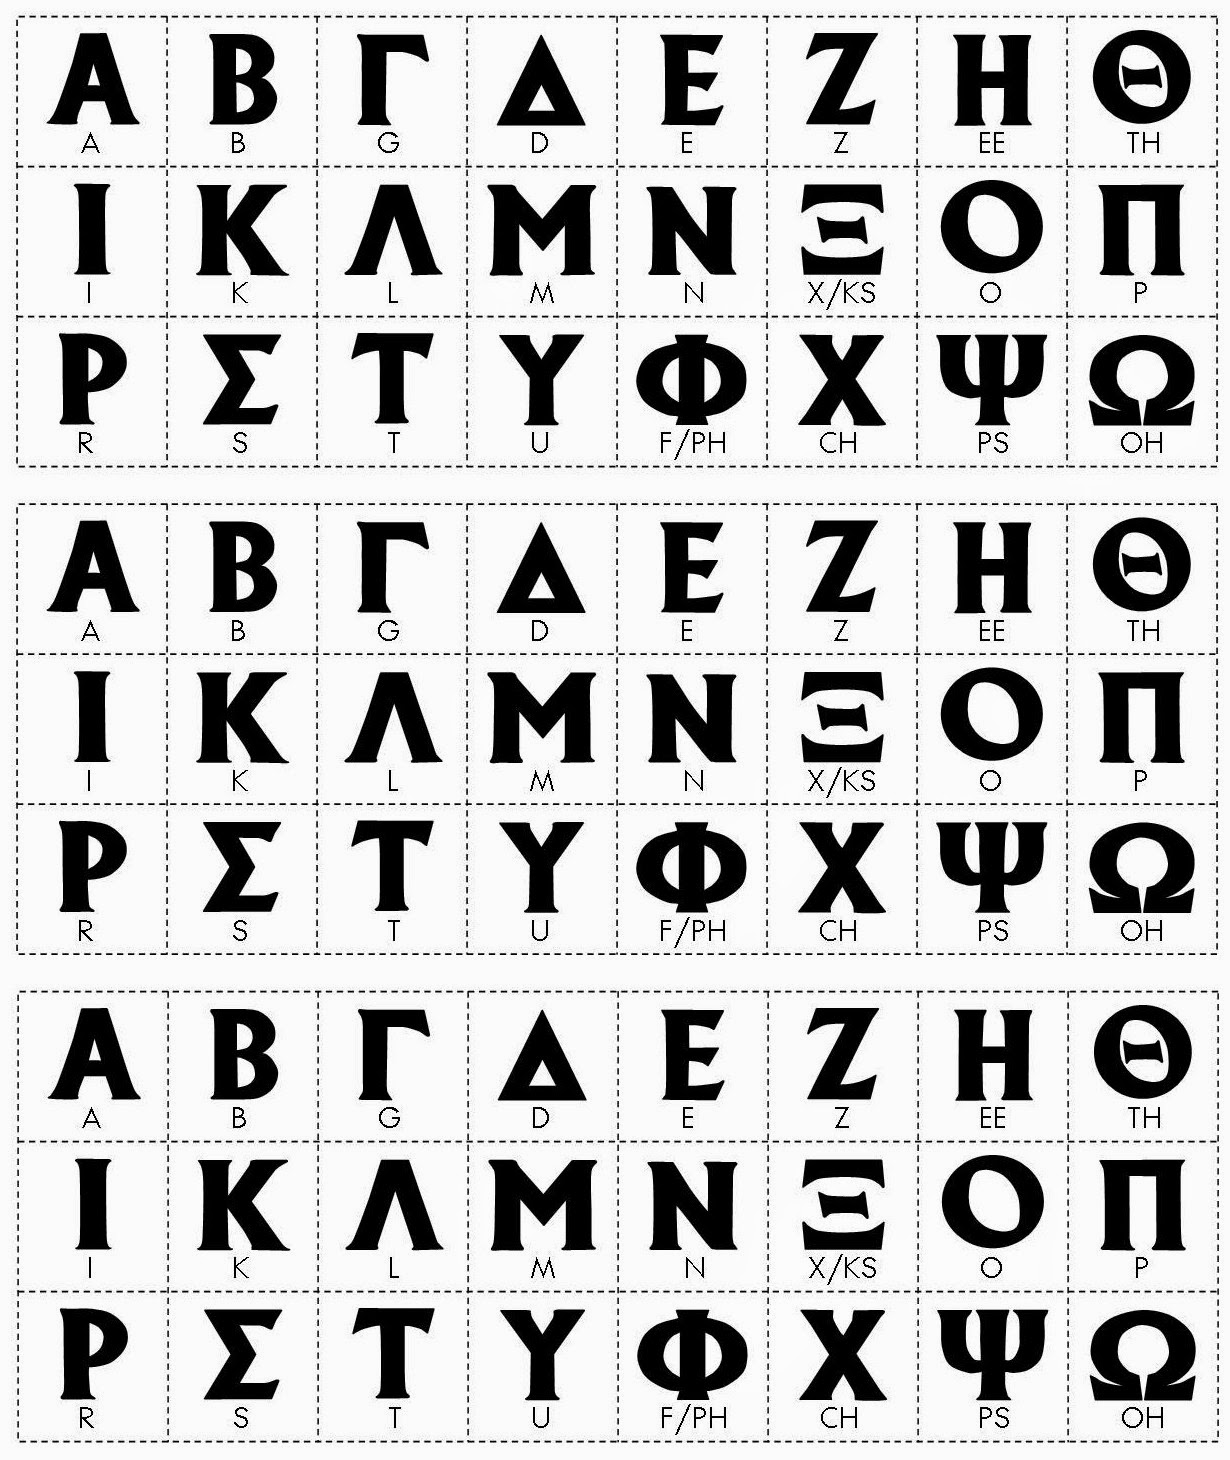 relentlessly-fun-deceptively-educational-reading-comprehension-with-the-greek-alphabet